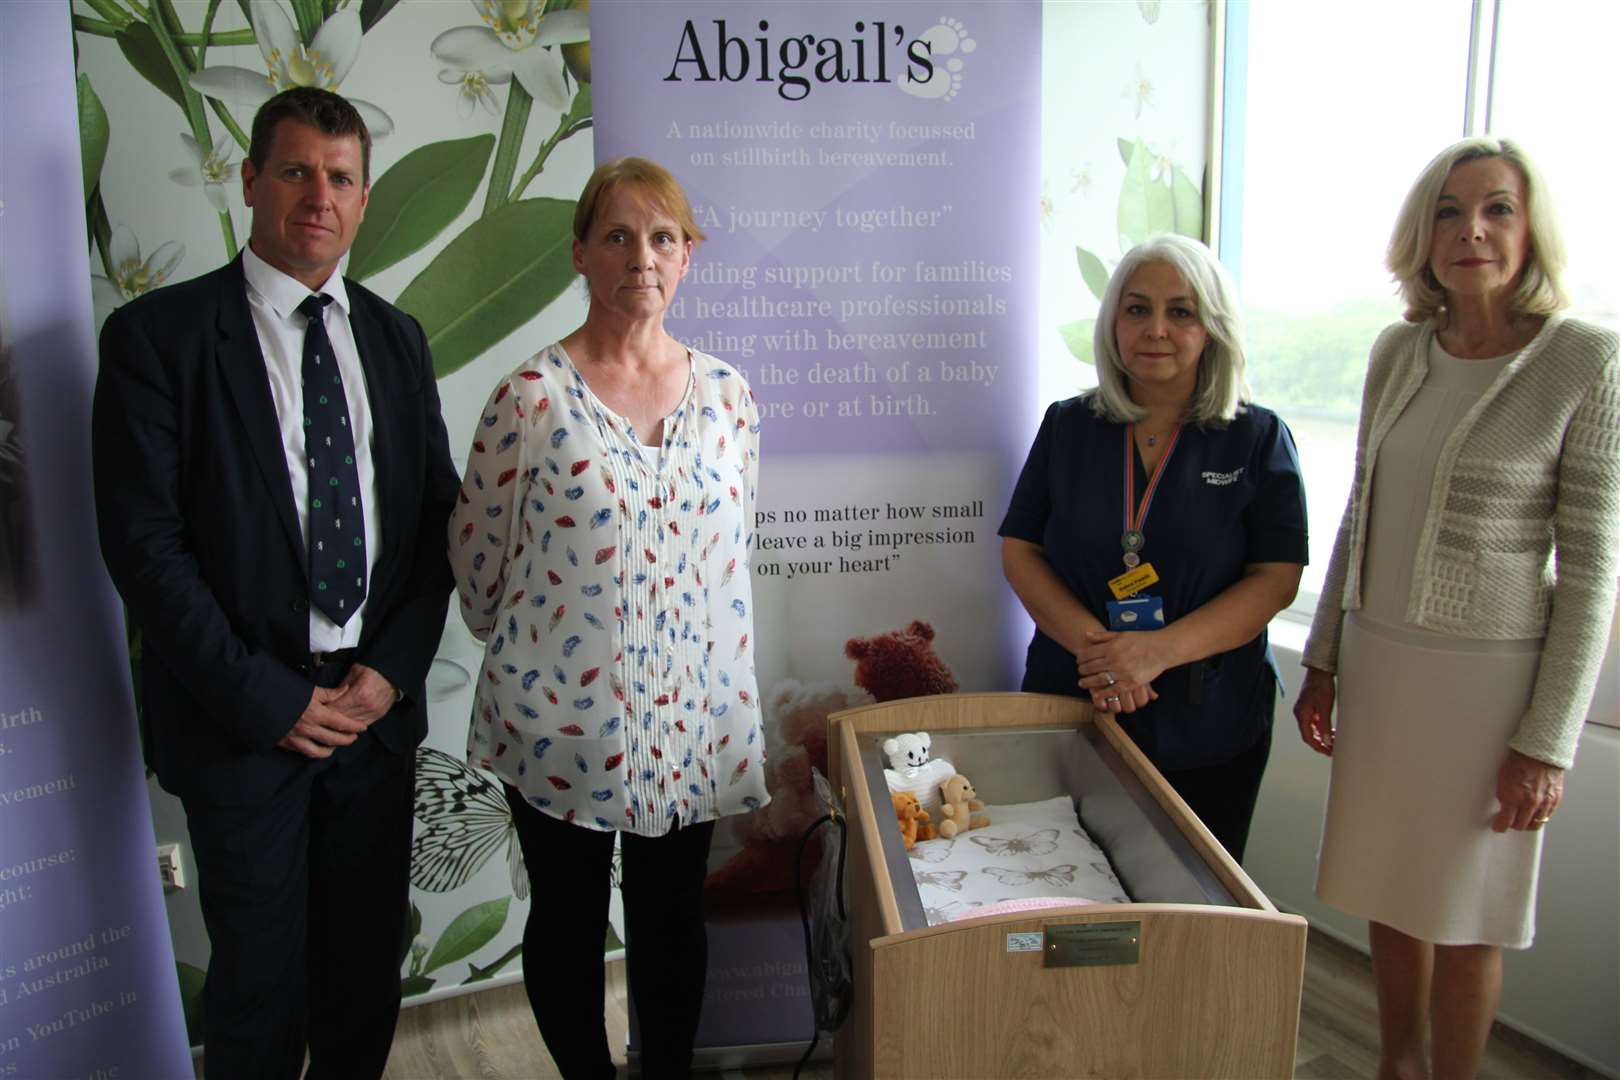 Left to right, vice president of Abigail's Footsteps, Craig Chalmers, Vicky Smart, St Thomas' Hospital bereavement midwife, Zahra Famili, and patron of Abigail's Footsteps, Lady Astor of Hever